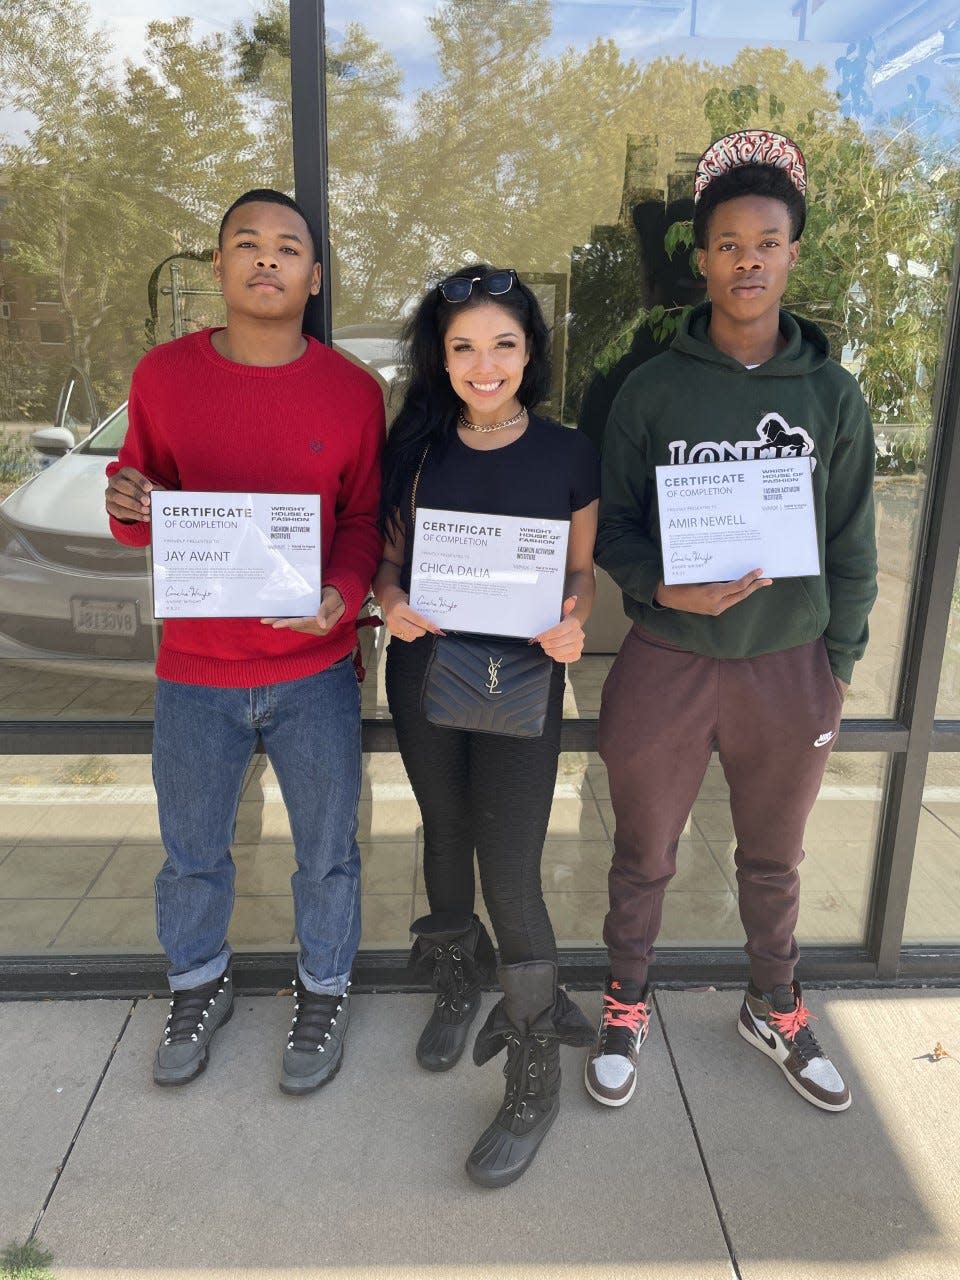 Jay Avant, Dalia Castaneda and Amir Newell hold certificates of completion for an online course from Wright House of Fashion in partnership with Warner Music Group.